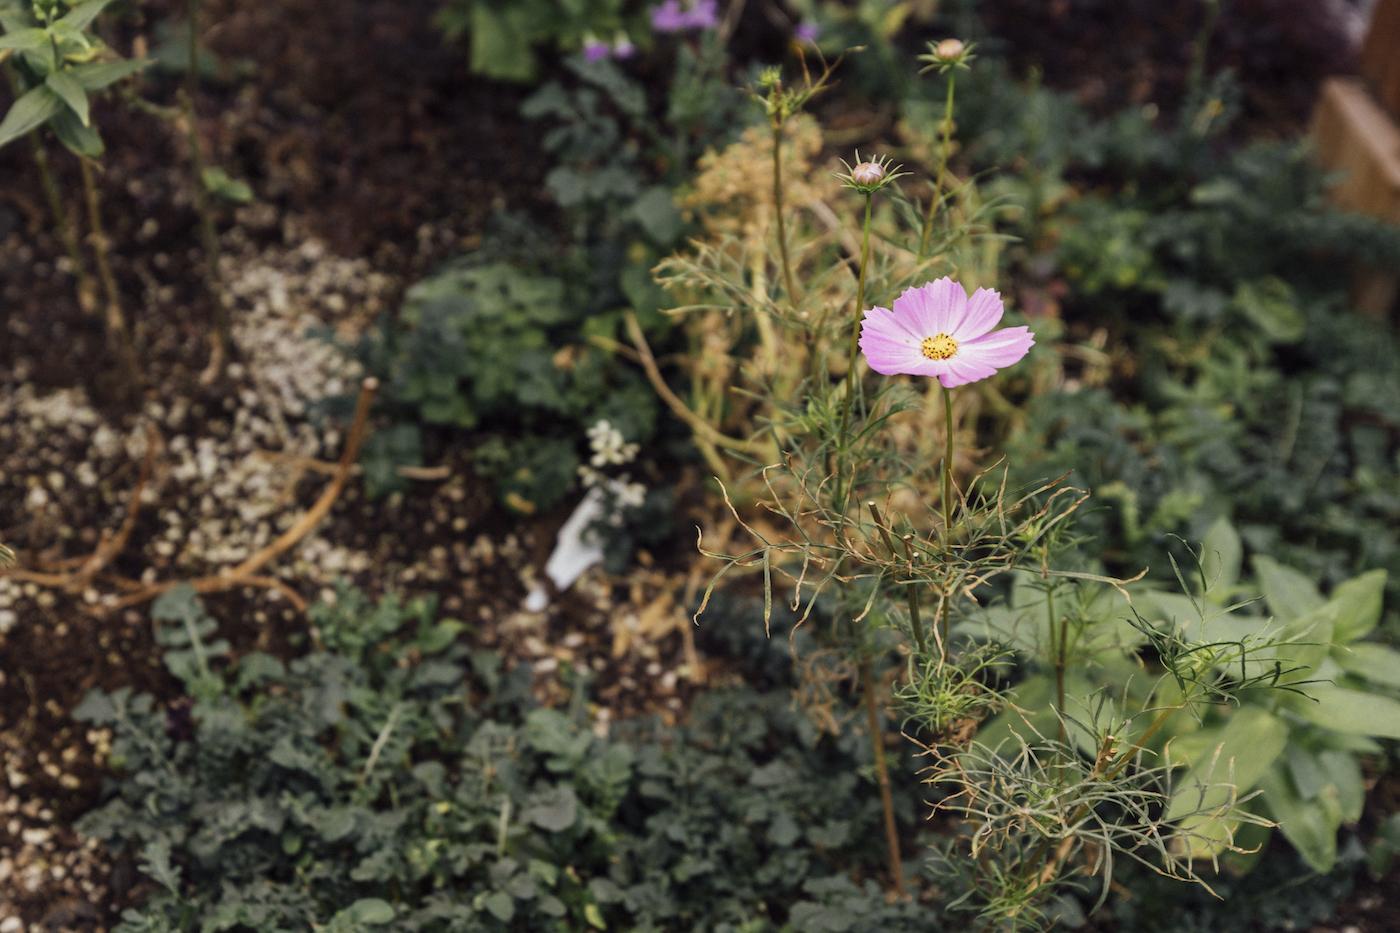 A cosmos flower and plant in Devon Quinn's greenhouse